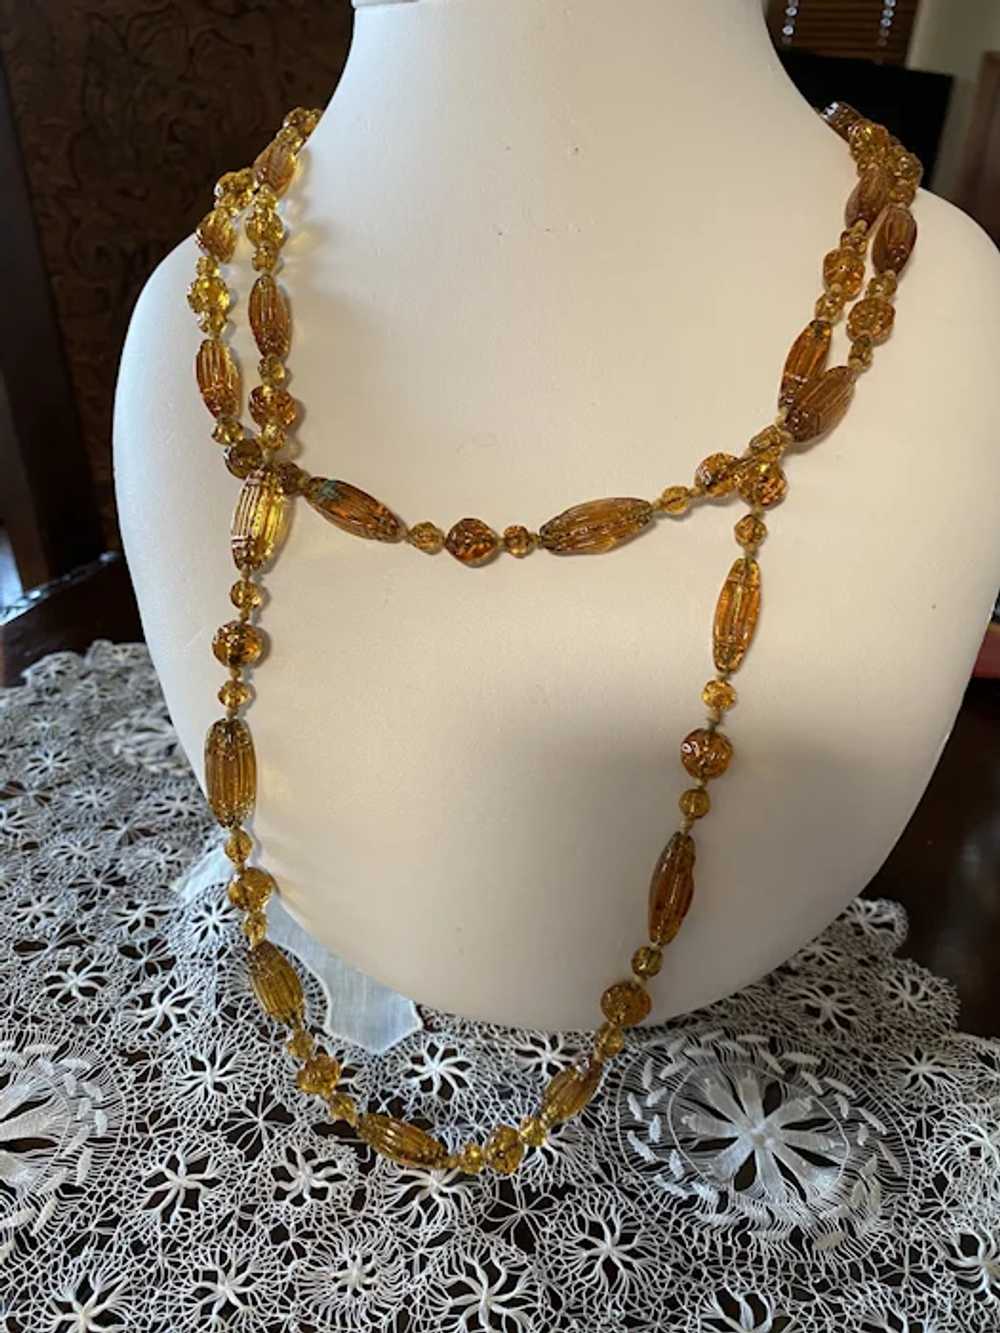 Antique Czech Amber Glass Necklace - image 8